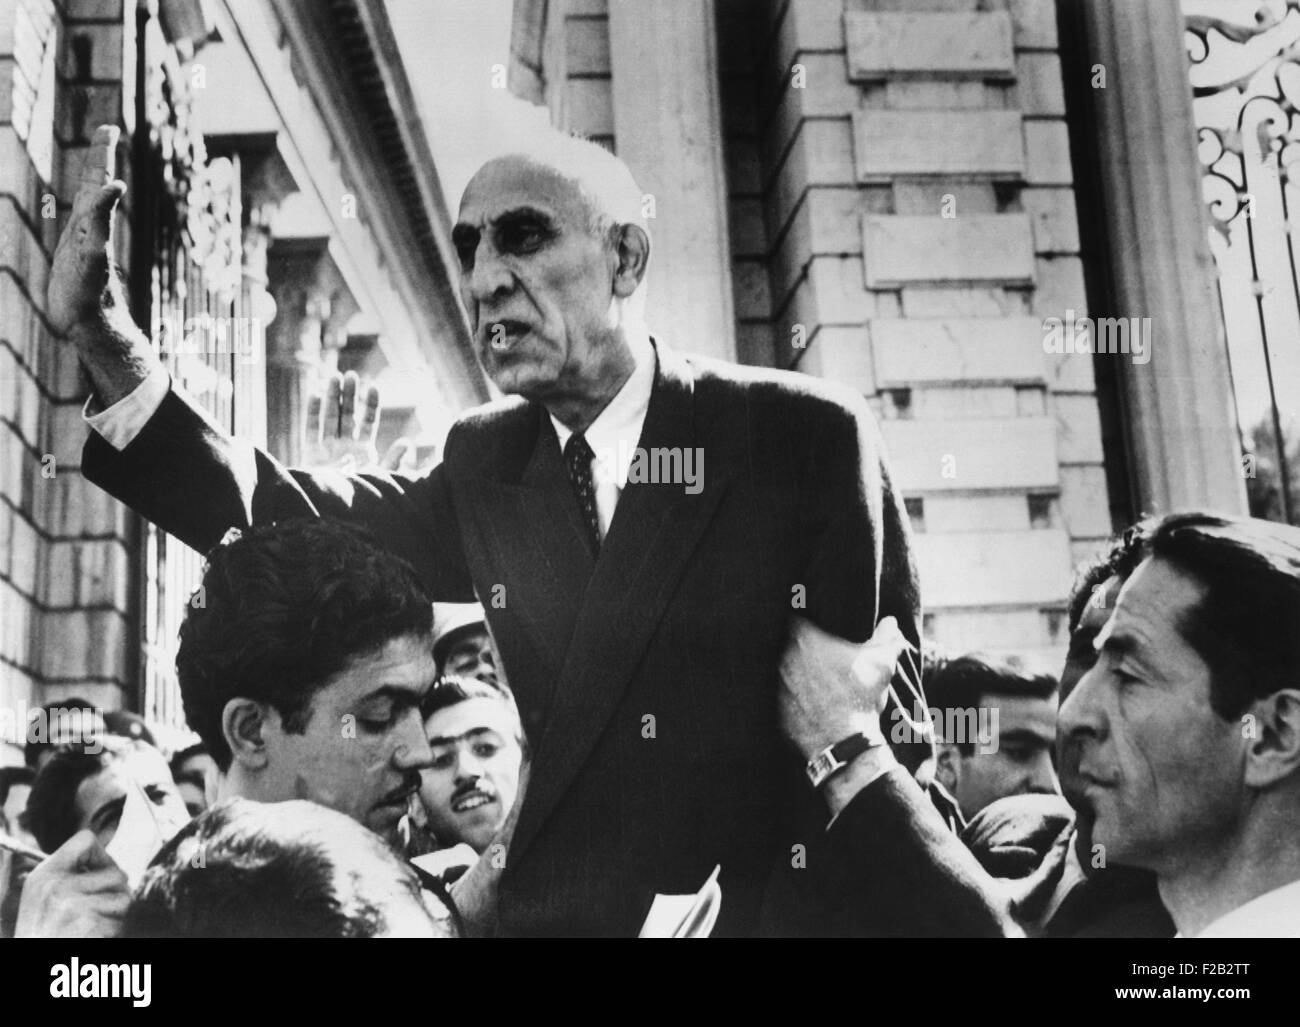 Mohammed Mossadegh speaking outside the Iranian Parliament building, ca. Oct 1, 1951. He repeated his stand on nationalization of the Anglo Iranian Oil Company refinery at Abadan. (CSU 2015 8 503) Stock Photo